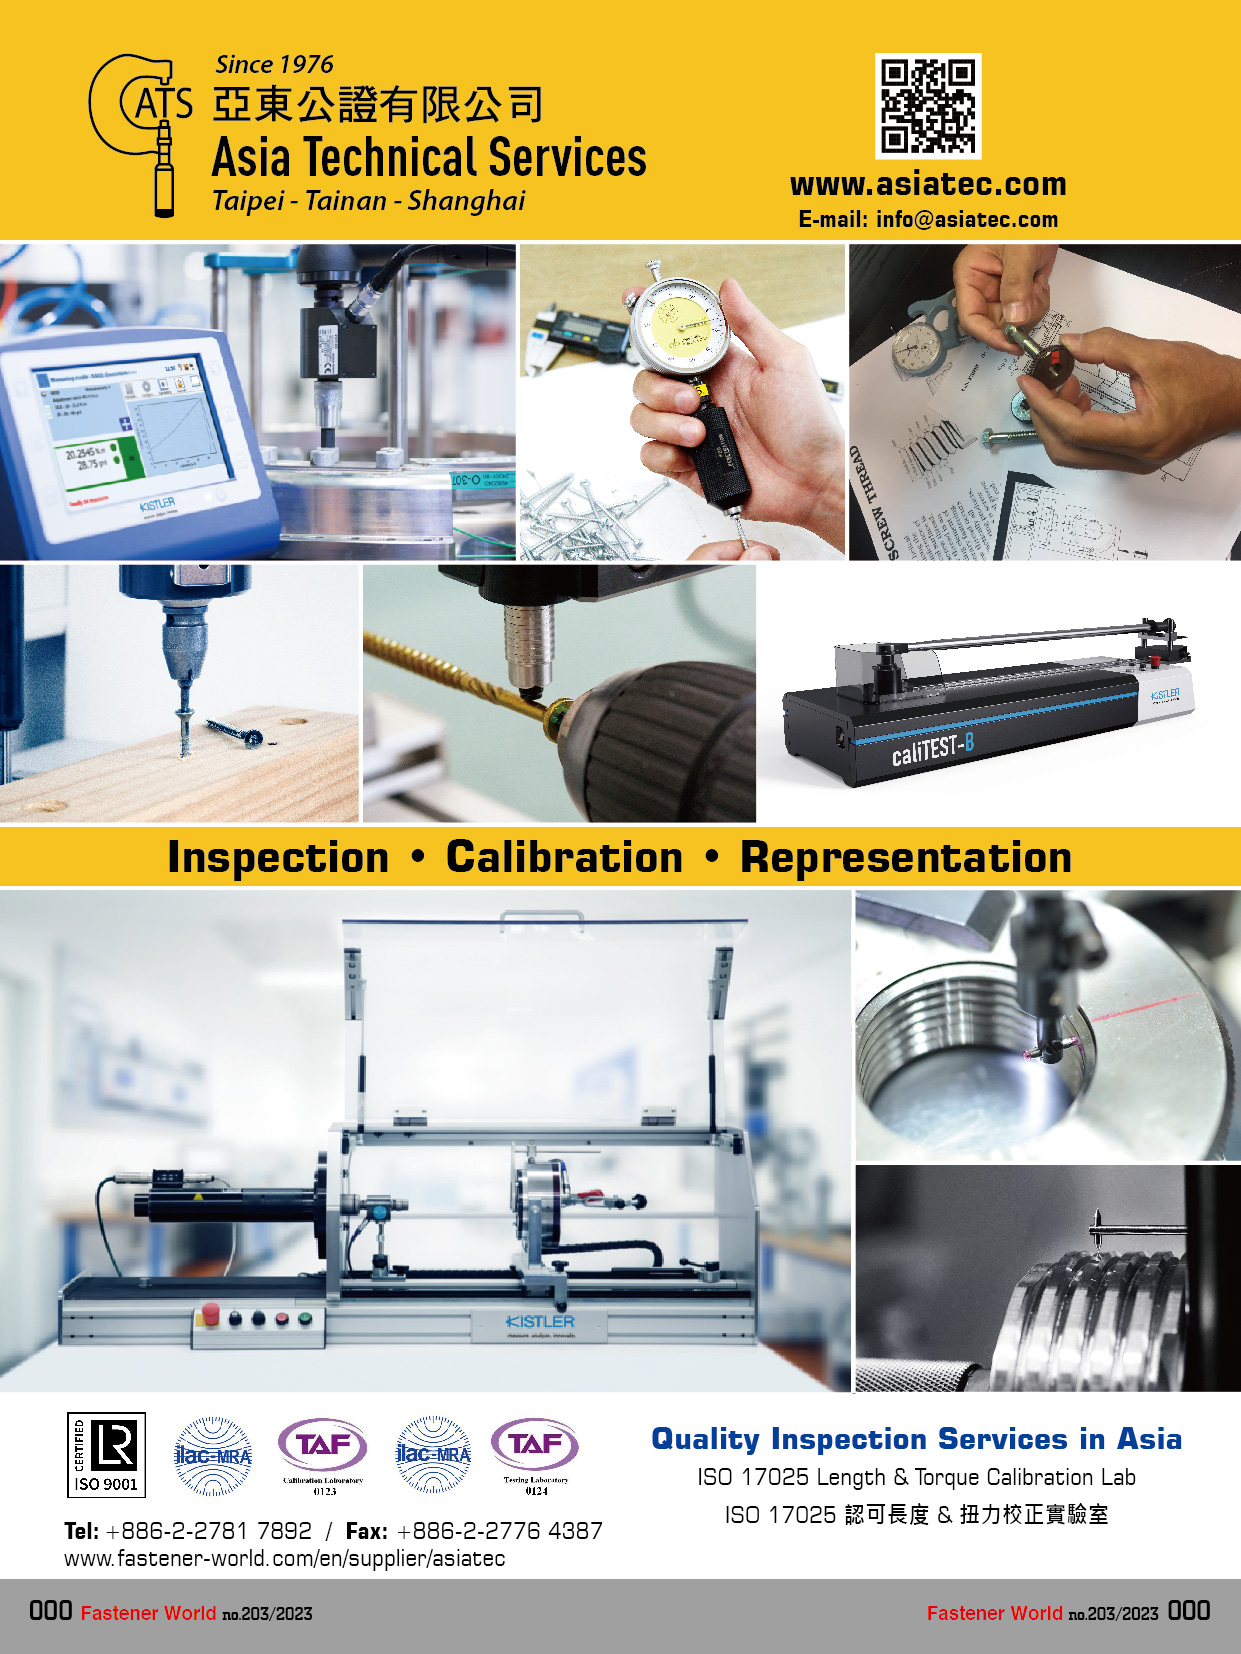 Asia Technical Services , Inspection x Calibration x Representation, Quality Inspection Services in Asia, ISO 17025 Length & Torque Calibration Lab